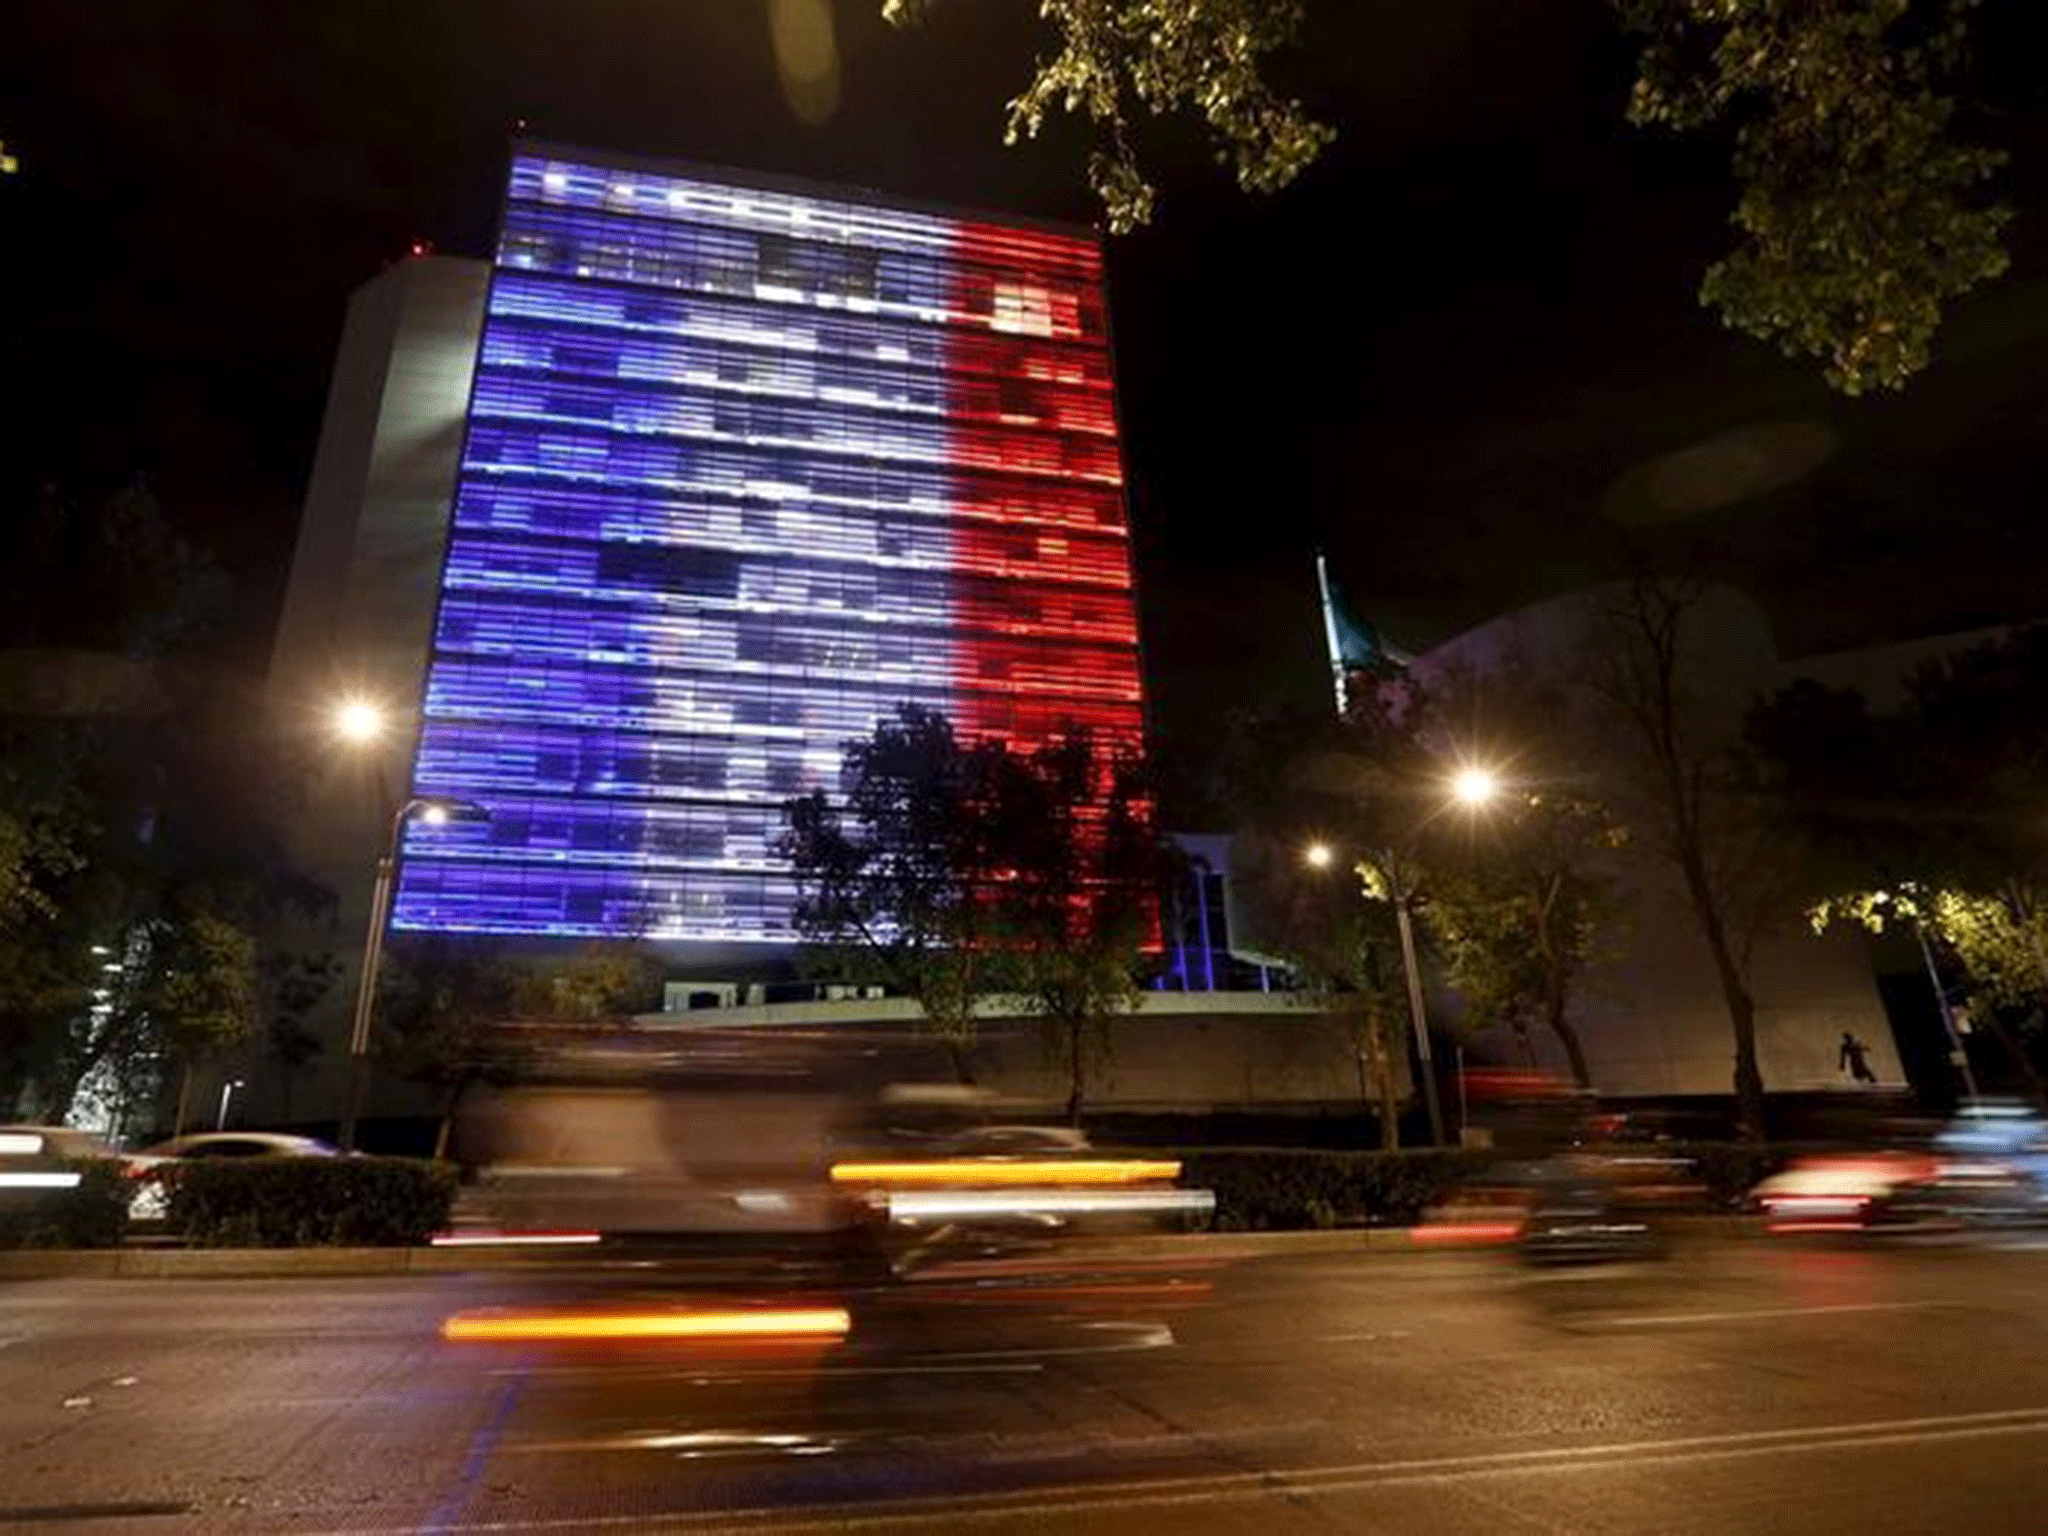 The Senate building is lit up in Mexico City, November 14, 2015